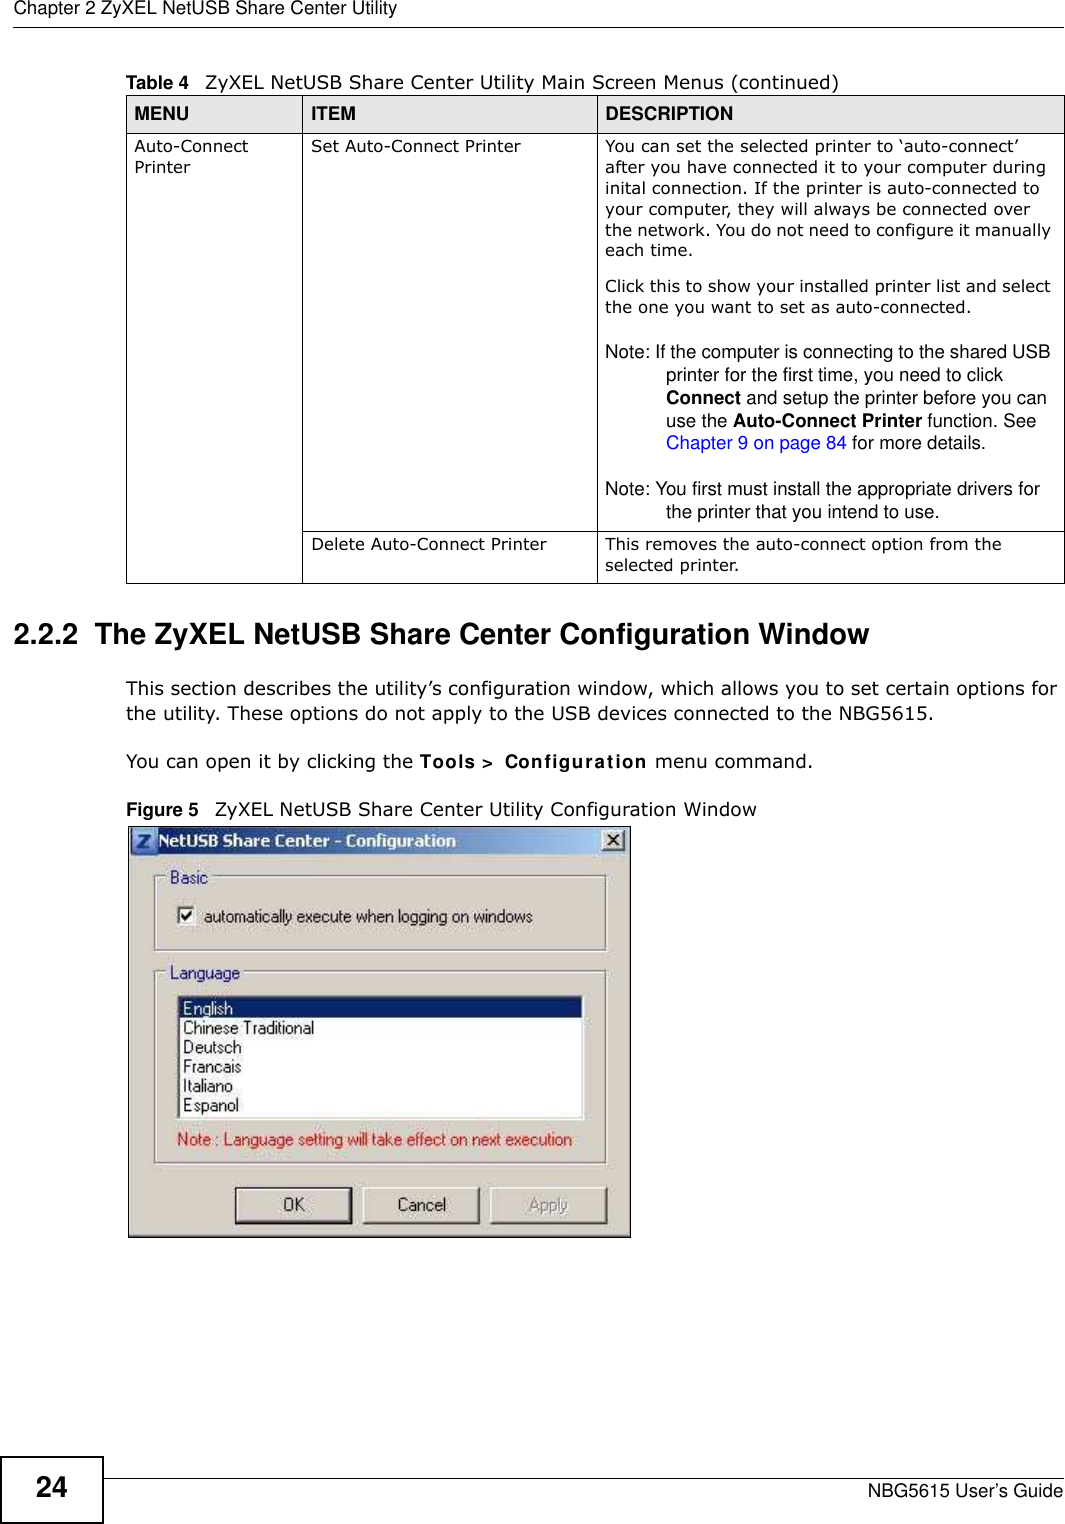 Chapter 2 ZyXEL NetUSB Share Center UtilityNBG5615 User’s Guide242.2.2  The ZyXEL NetUSB Share Center Configuration WindowThis section describes the utility’s configuration window, which allows you to set certain options for the utility. These options do not apply to the USB devices connected to the NBG5615. You can open it by clicking the Tools &gt;  Configuration menu command.Figure 5   ZyXEL NetUSB Share Center Utility Configuration WindowAuto-Connect PrinterSet Auto-Connect Printer You can set the selected printer to ‘auto-connect’ after you have connected it to your computer during inital connection. If the printer is auto-connected to your computer, they will always be connected over the network. You do not need to configure it manually each time.Click this to show your installed printer list and select the one you want to set as auto-connected. Note: If the computer is connecting to the shared USB printer for the first time, you need to click Connect and setup the printer before you can use the Auto-Connect Printer function. See Chapter 9 on page 84 for more details. Note: You first must install the appropriate drivers for the printer that you intend to use.Delete Auto-Connect Printer This removes the auto-connect option from the selected printer.Table 4   ZyXEL NetUSB Share Center Utility Main Screen Menus (continued)MENU ITEM DESCRIPTION